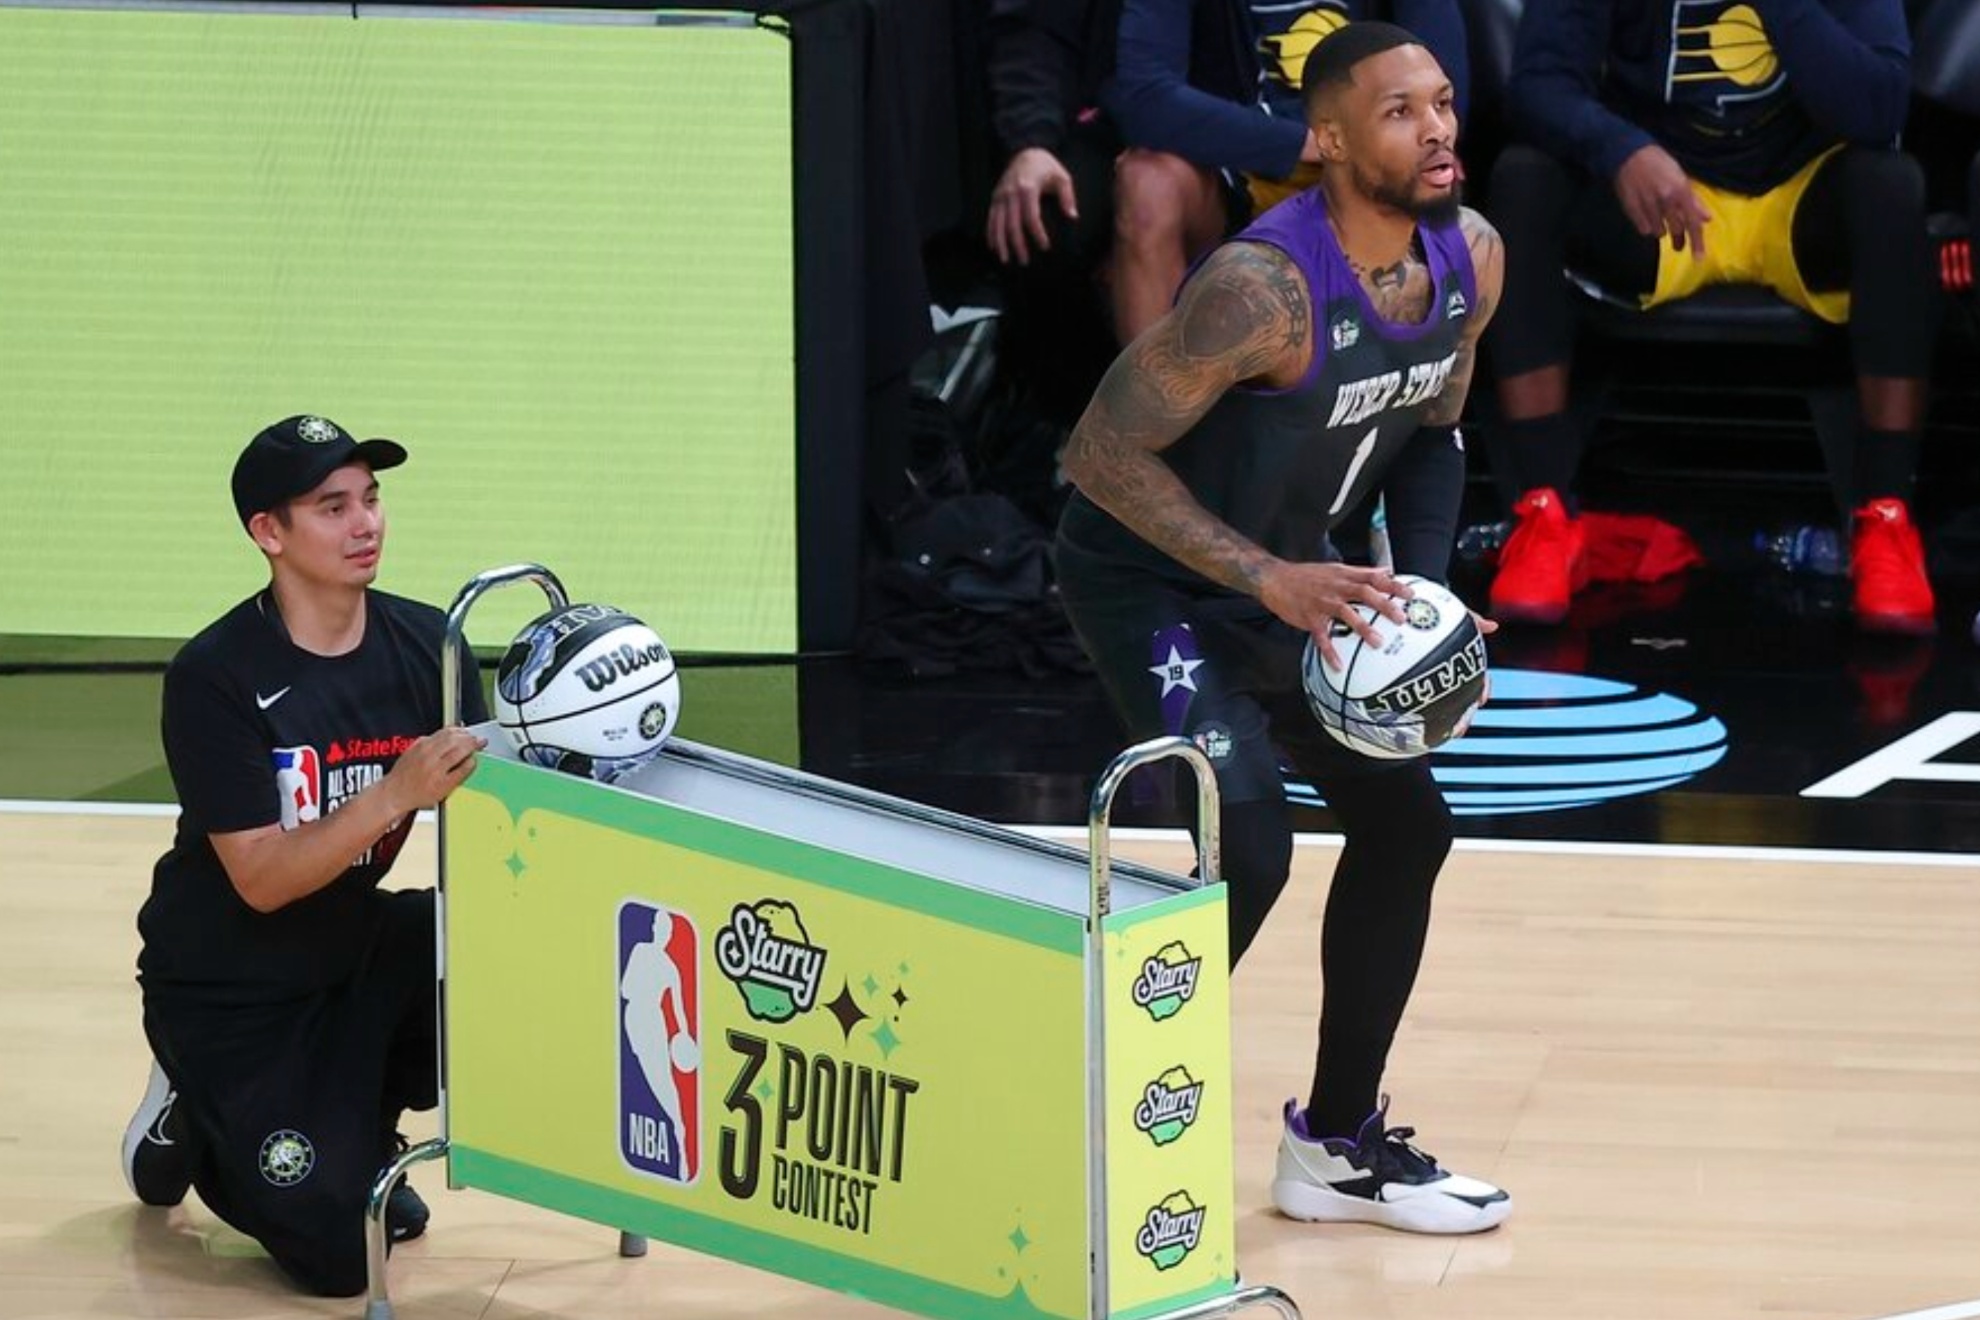 The NBAs 3-point contest will take place this Saturday during the All-Star weekend